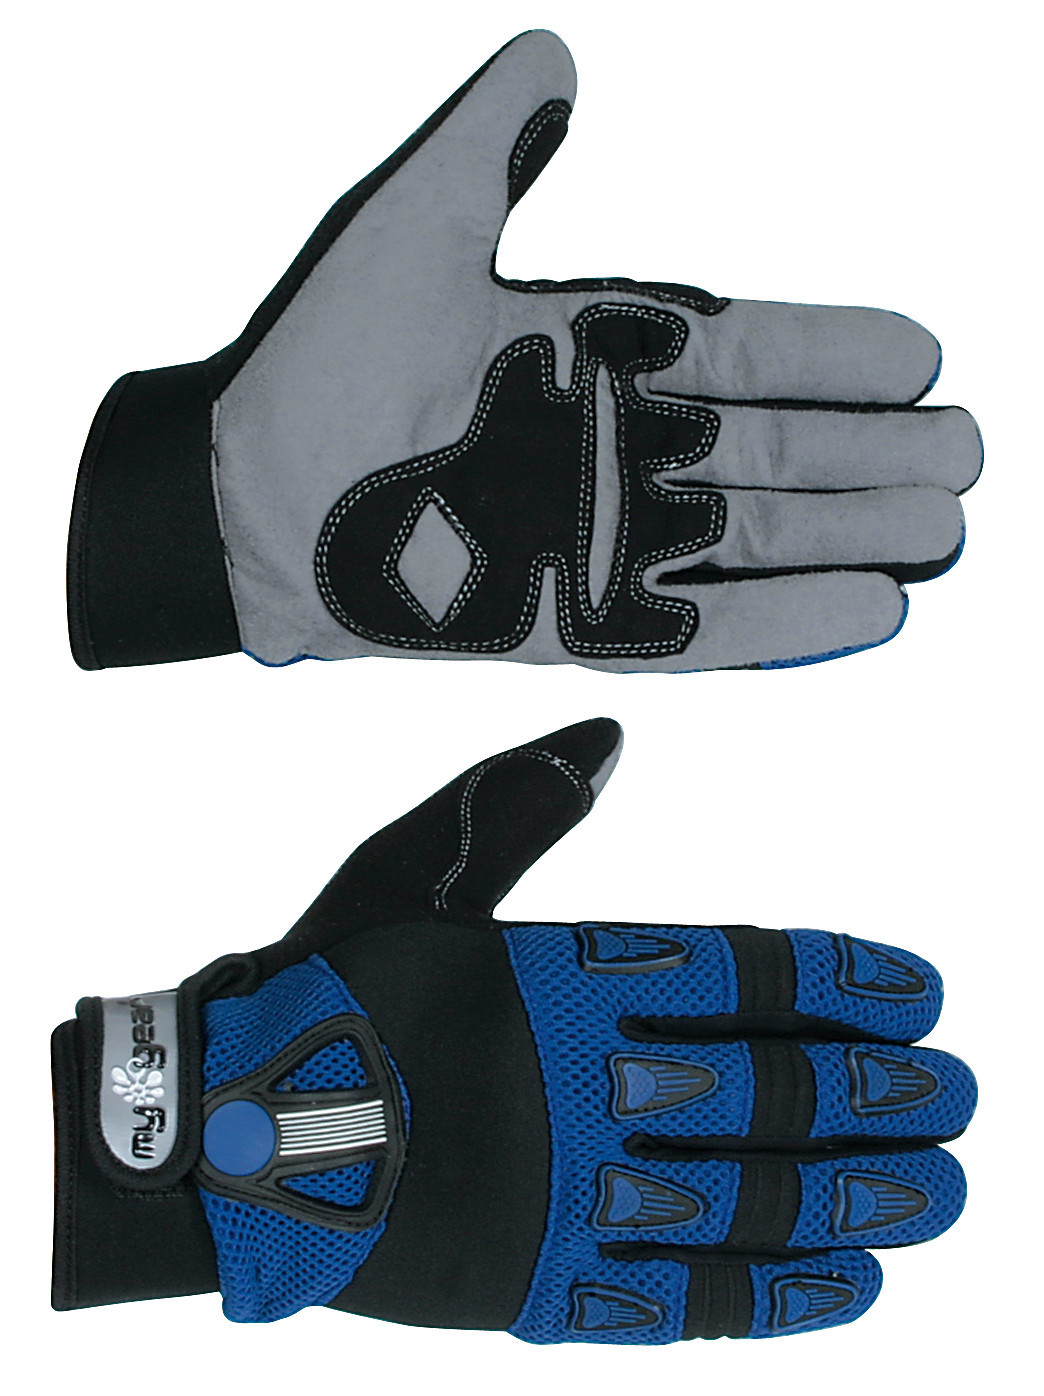 Tough, competition gloves - M thumb